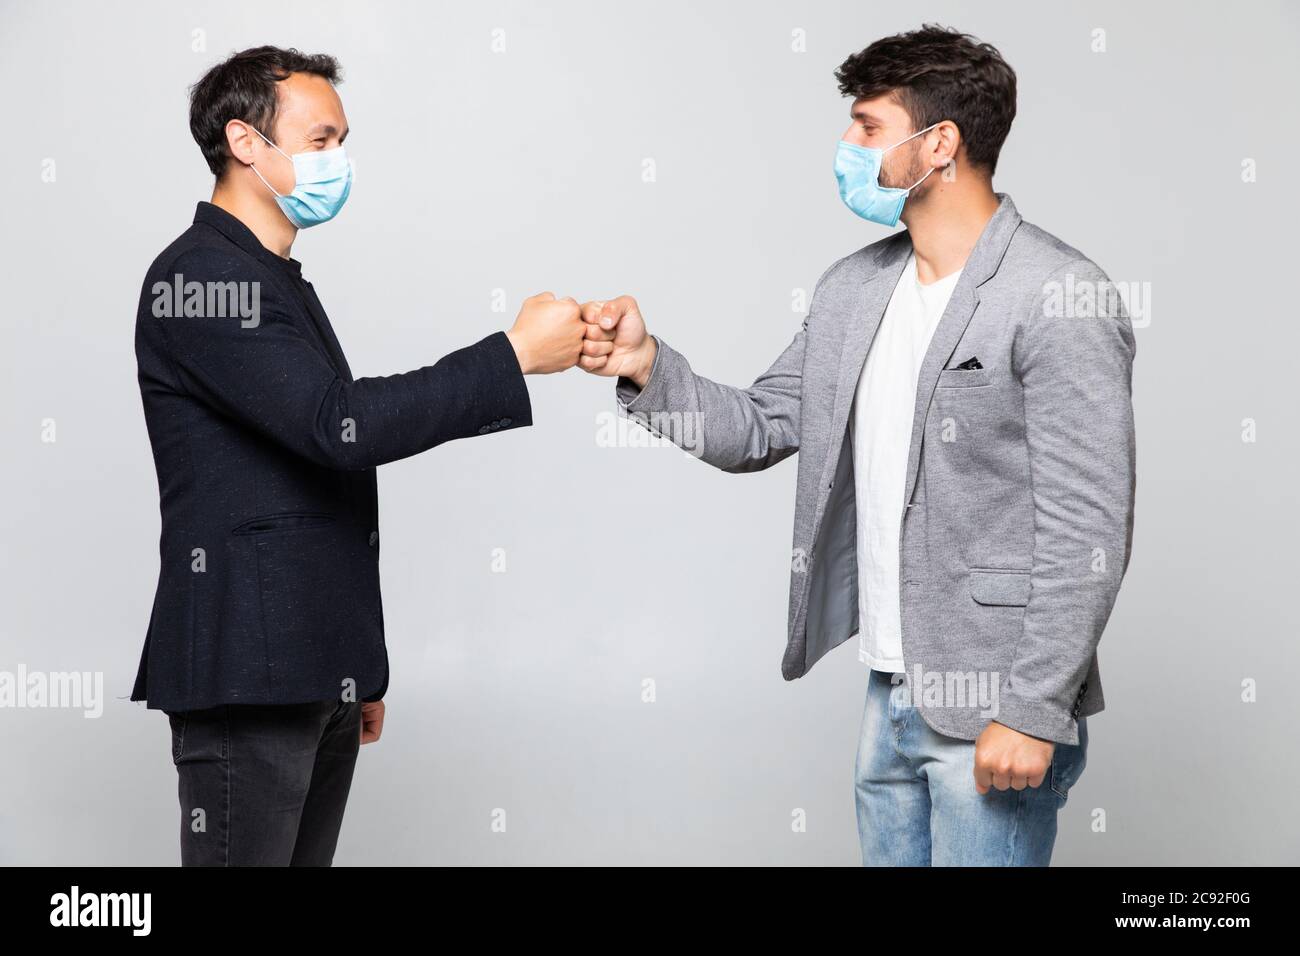 Fist bump greeting. Two people in suits greet each other in a meeting. They give up the untraditional handshake isolated on a white background. Stock Photo